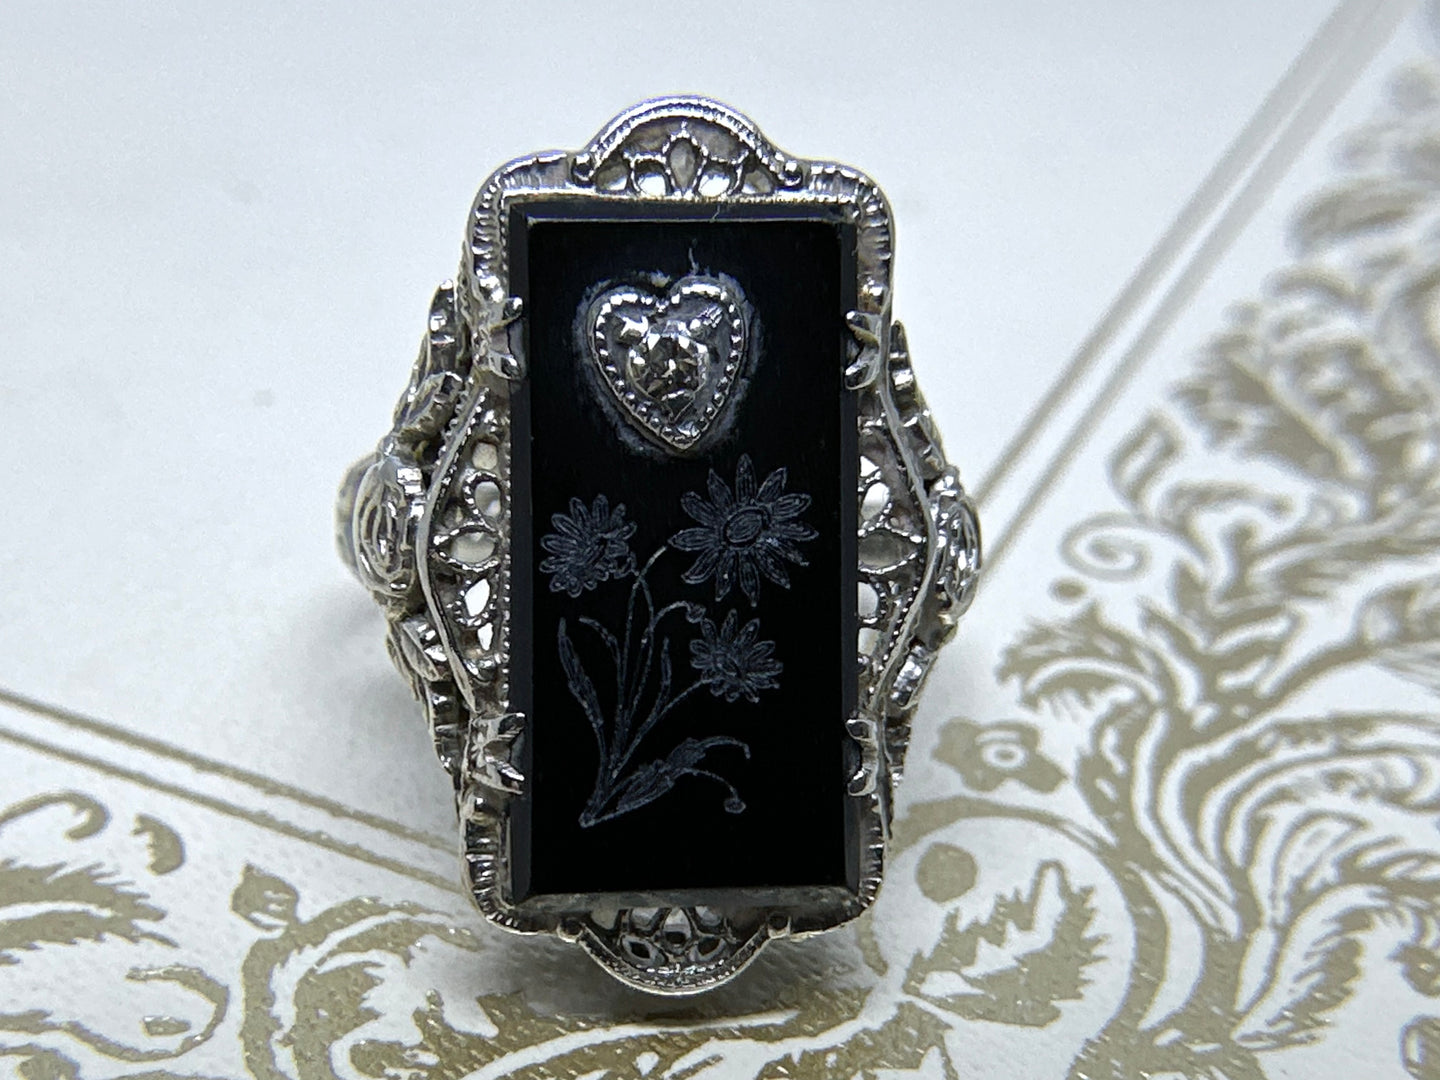 ANTIQUE ONYX AND DIAMOND FILIGREE RING IN 14KT WHITE GOLD